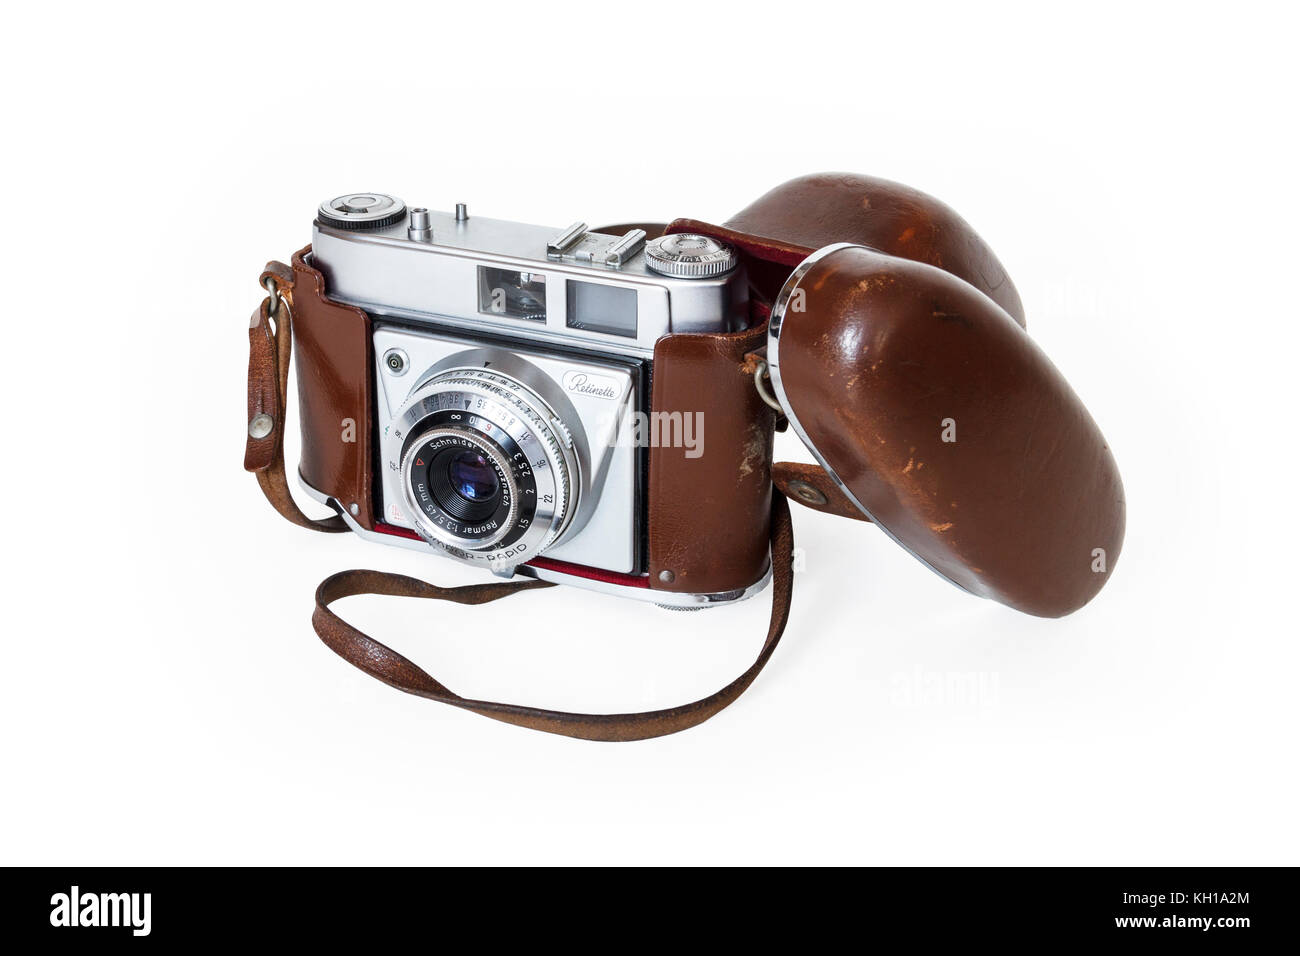 1950s Kodak Retinette 35mm roll film camera with Schneider-Kreuznach Reomar  45mm lens, in original leather case, isolated against a white background  Stock Photo - Alamy